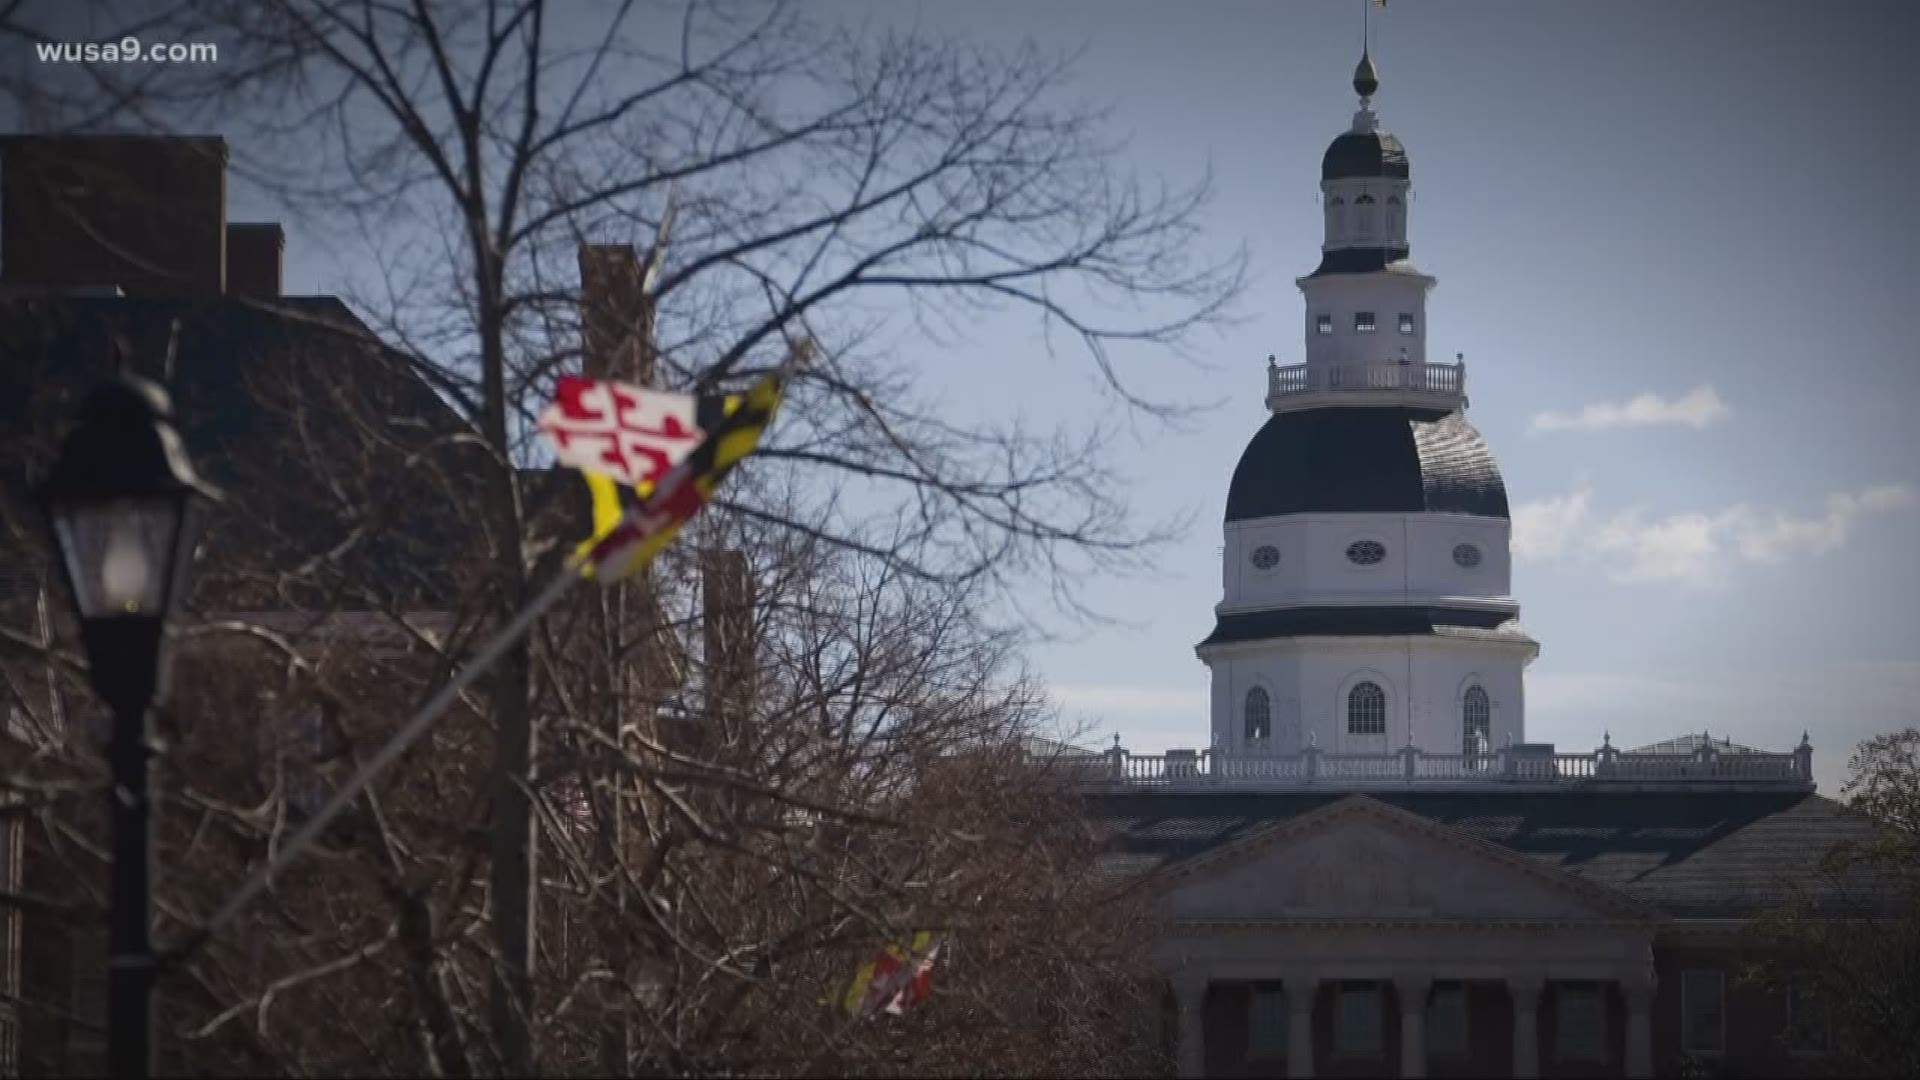 While Maryland voters re-elected Republican Governor Larry Hogan in November, Democrats grew their majority in the part-time legislature.